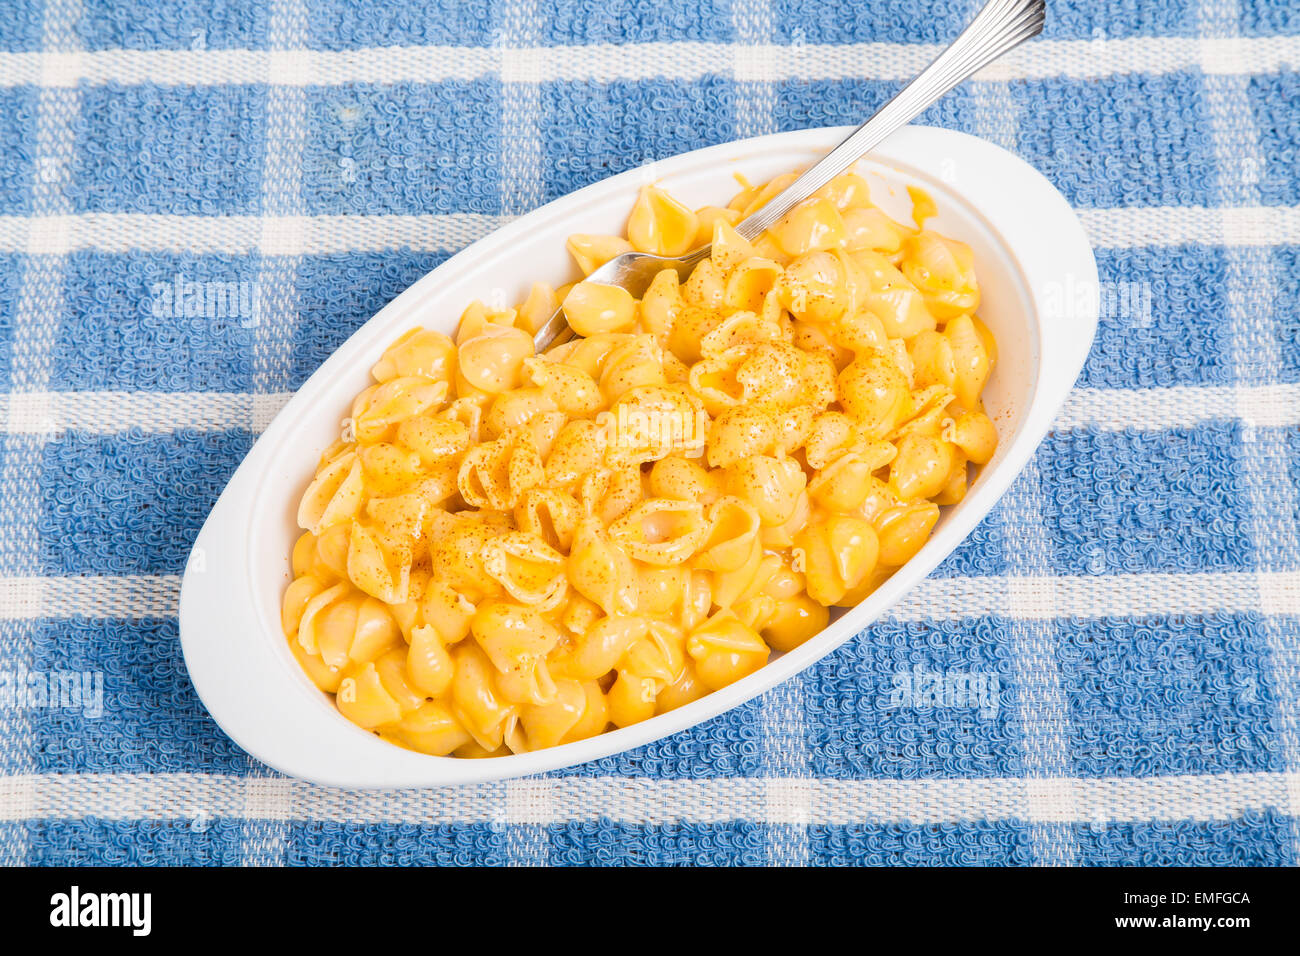 A white dish of macaroni and cheese with fork on blue plaid towel Stock Photo